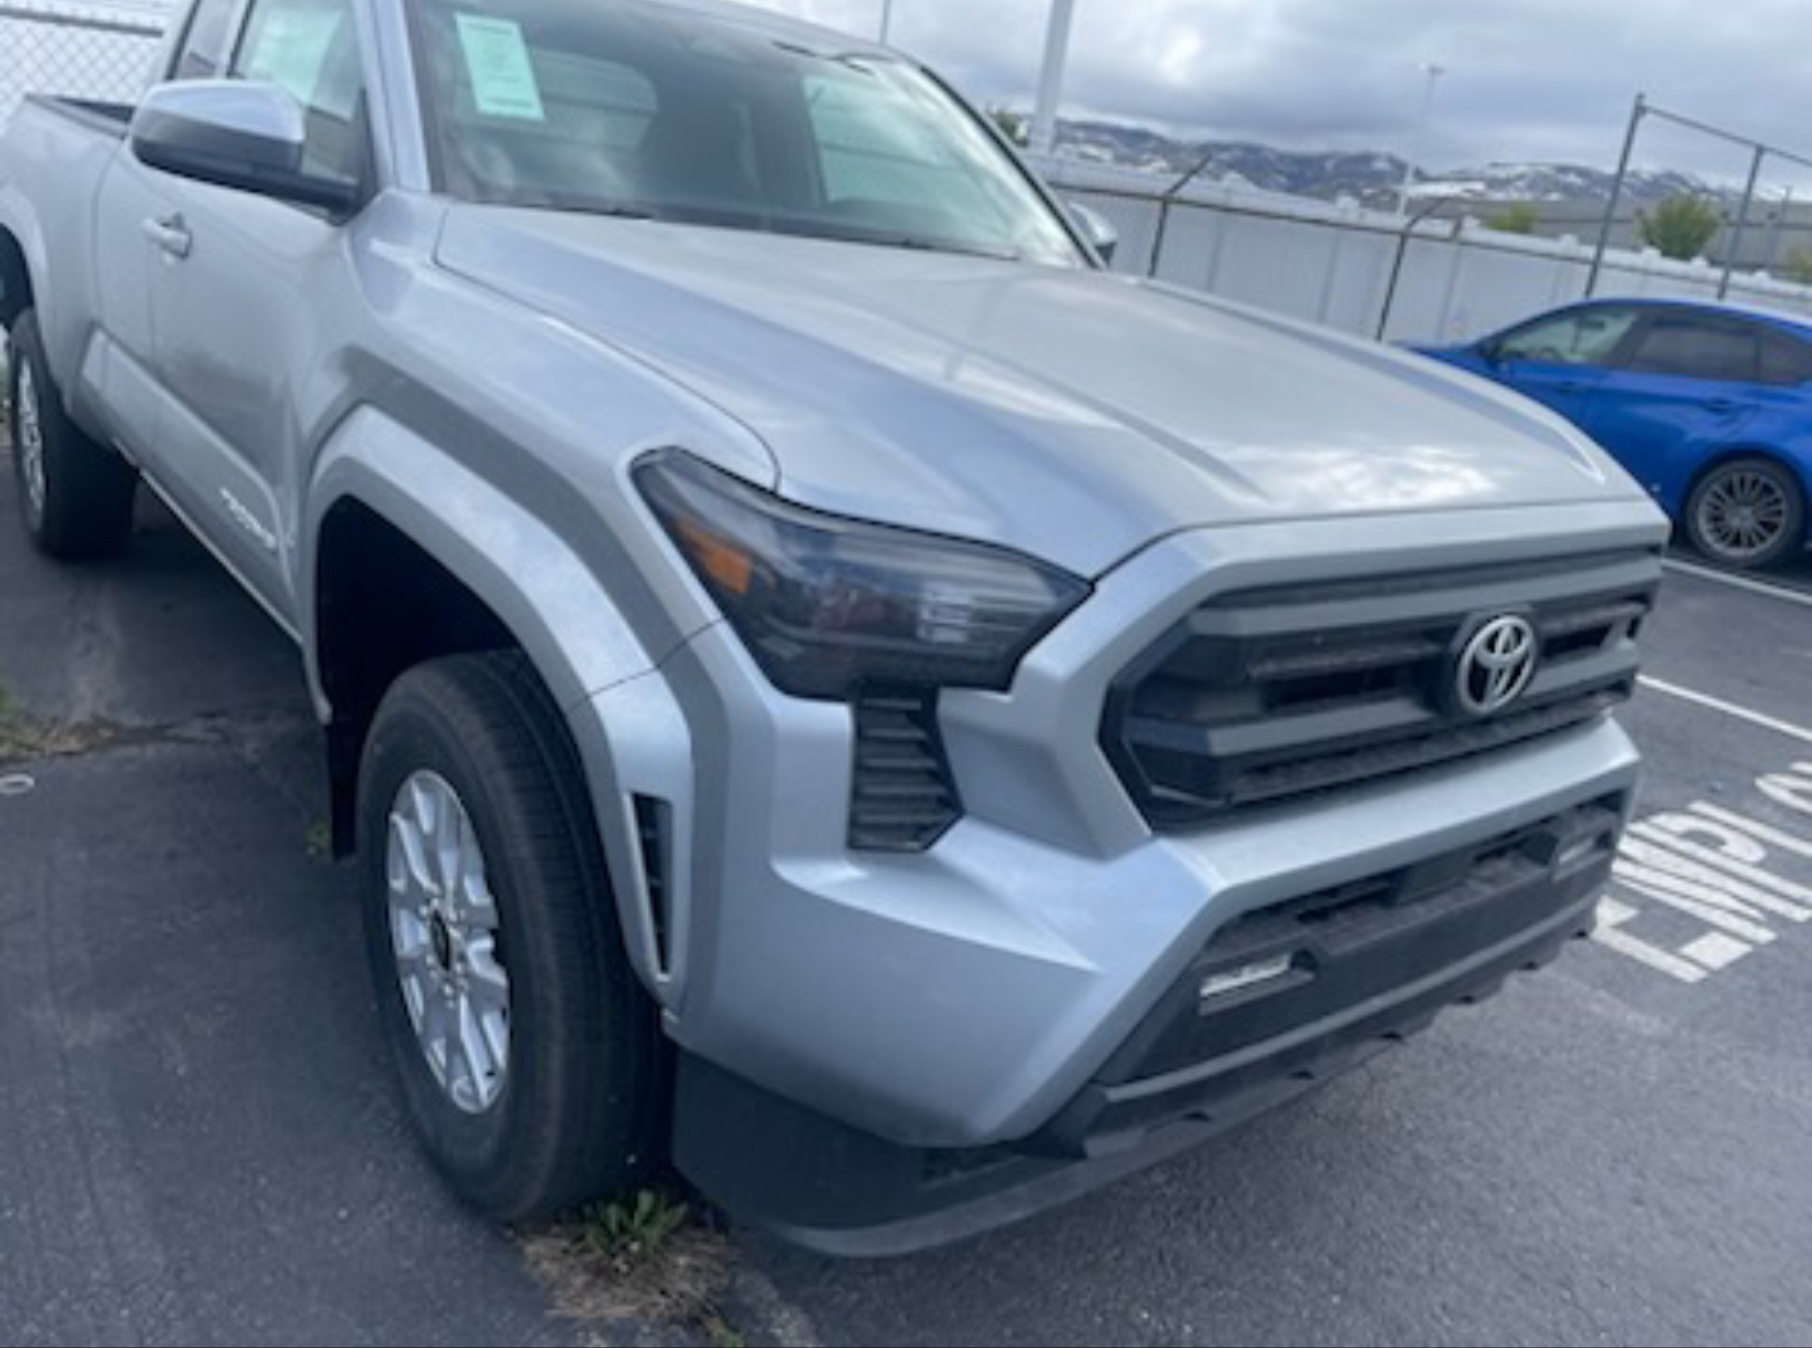 2024 Tacoma Delivered 4X4 SR5 Xtracab in Celestial Silver Metallic 1000007391